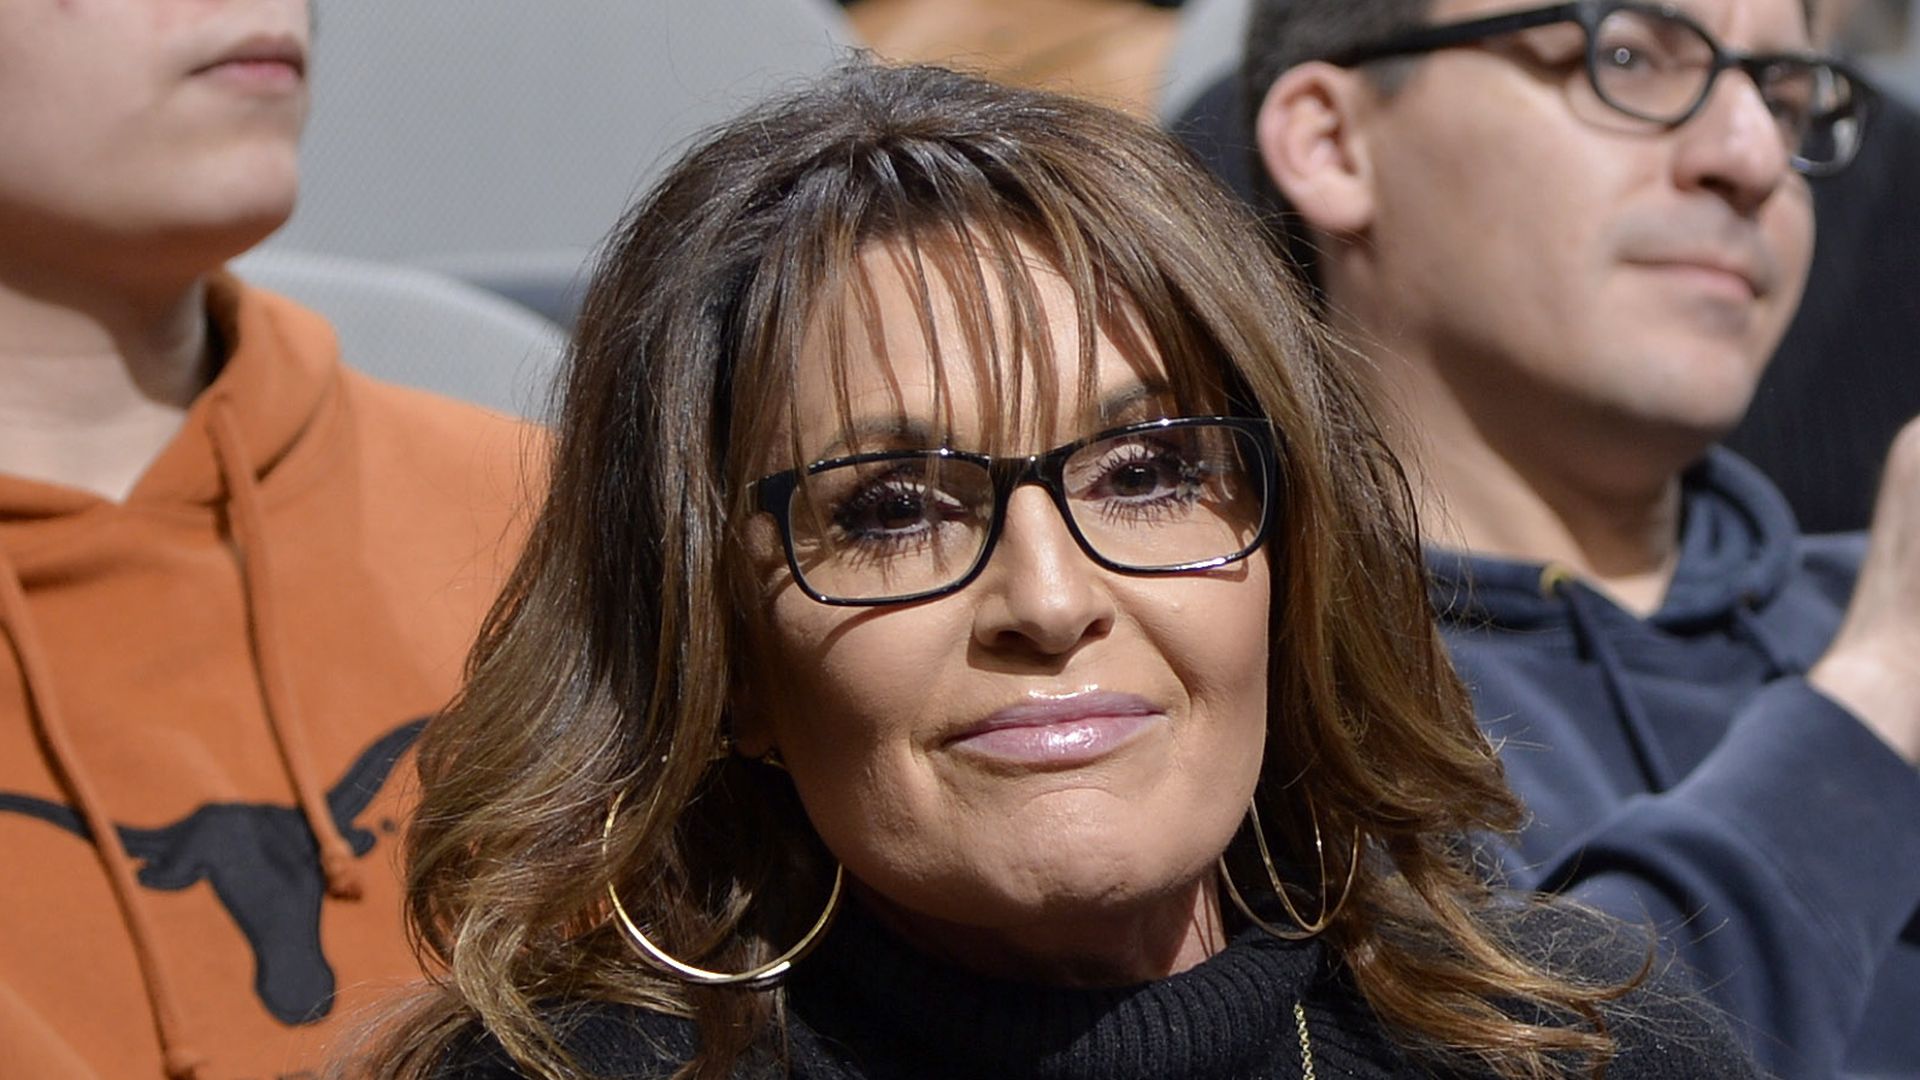 Former Alaskan Governor Sarah Palin watches the San Antonio Spurs play against the Denver Nuggets on March 4, 2019 at the AT&T Center in San Antonio, Texas. 